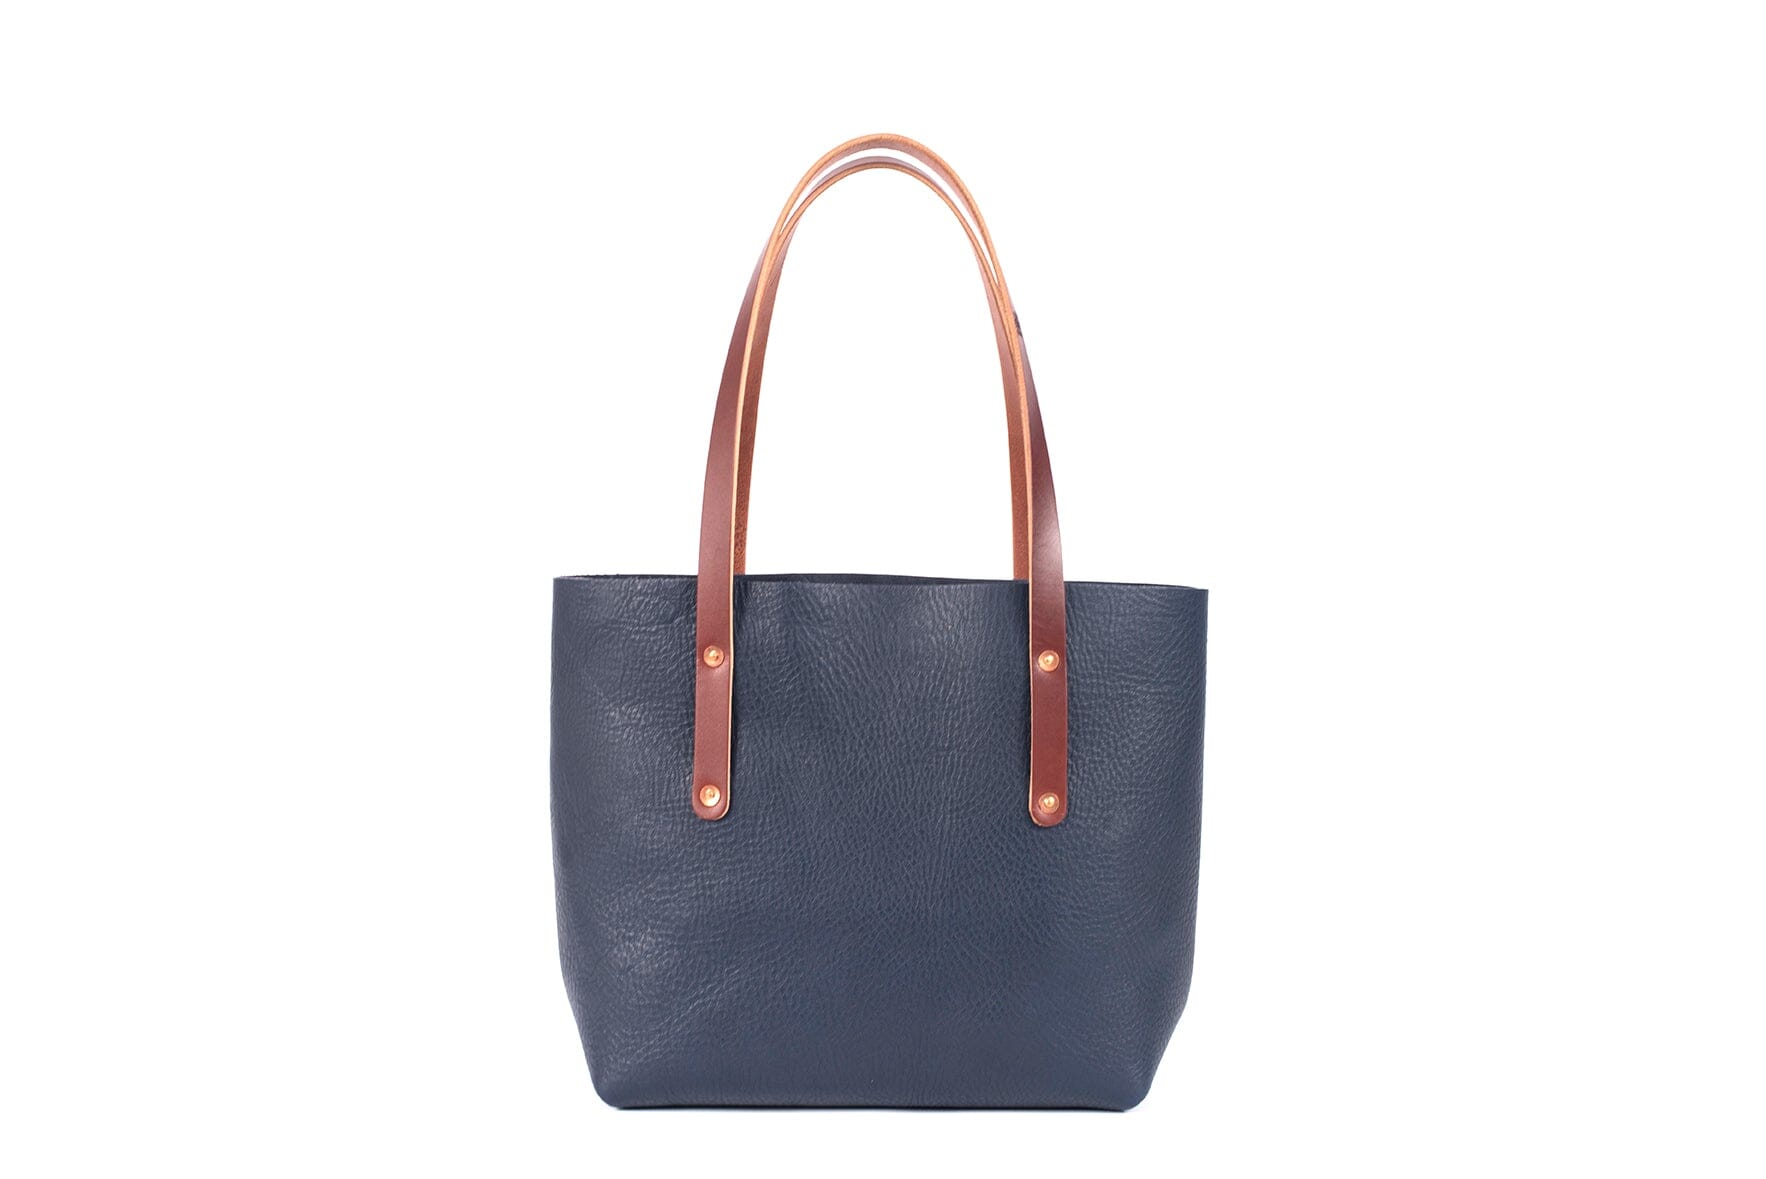 AVERY LEATHER TOTE BAG - SMALL - NAVY